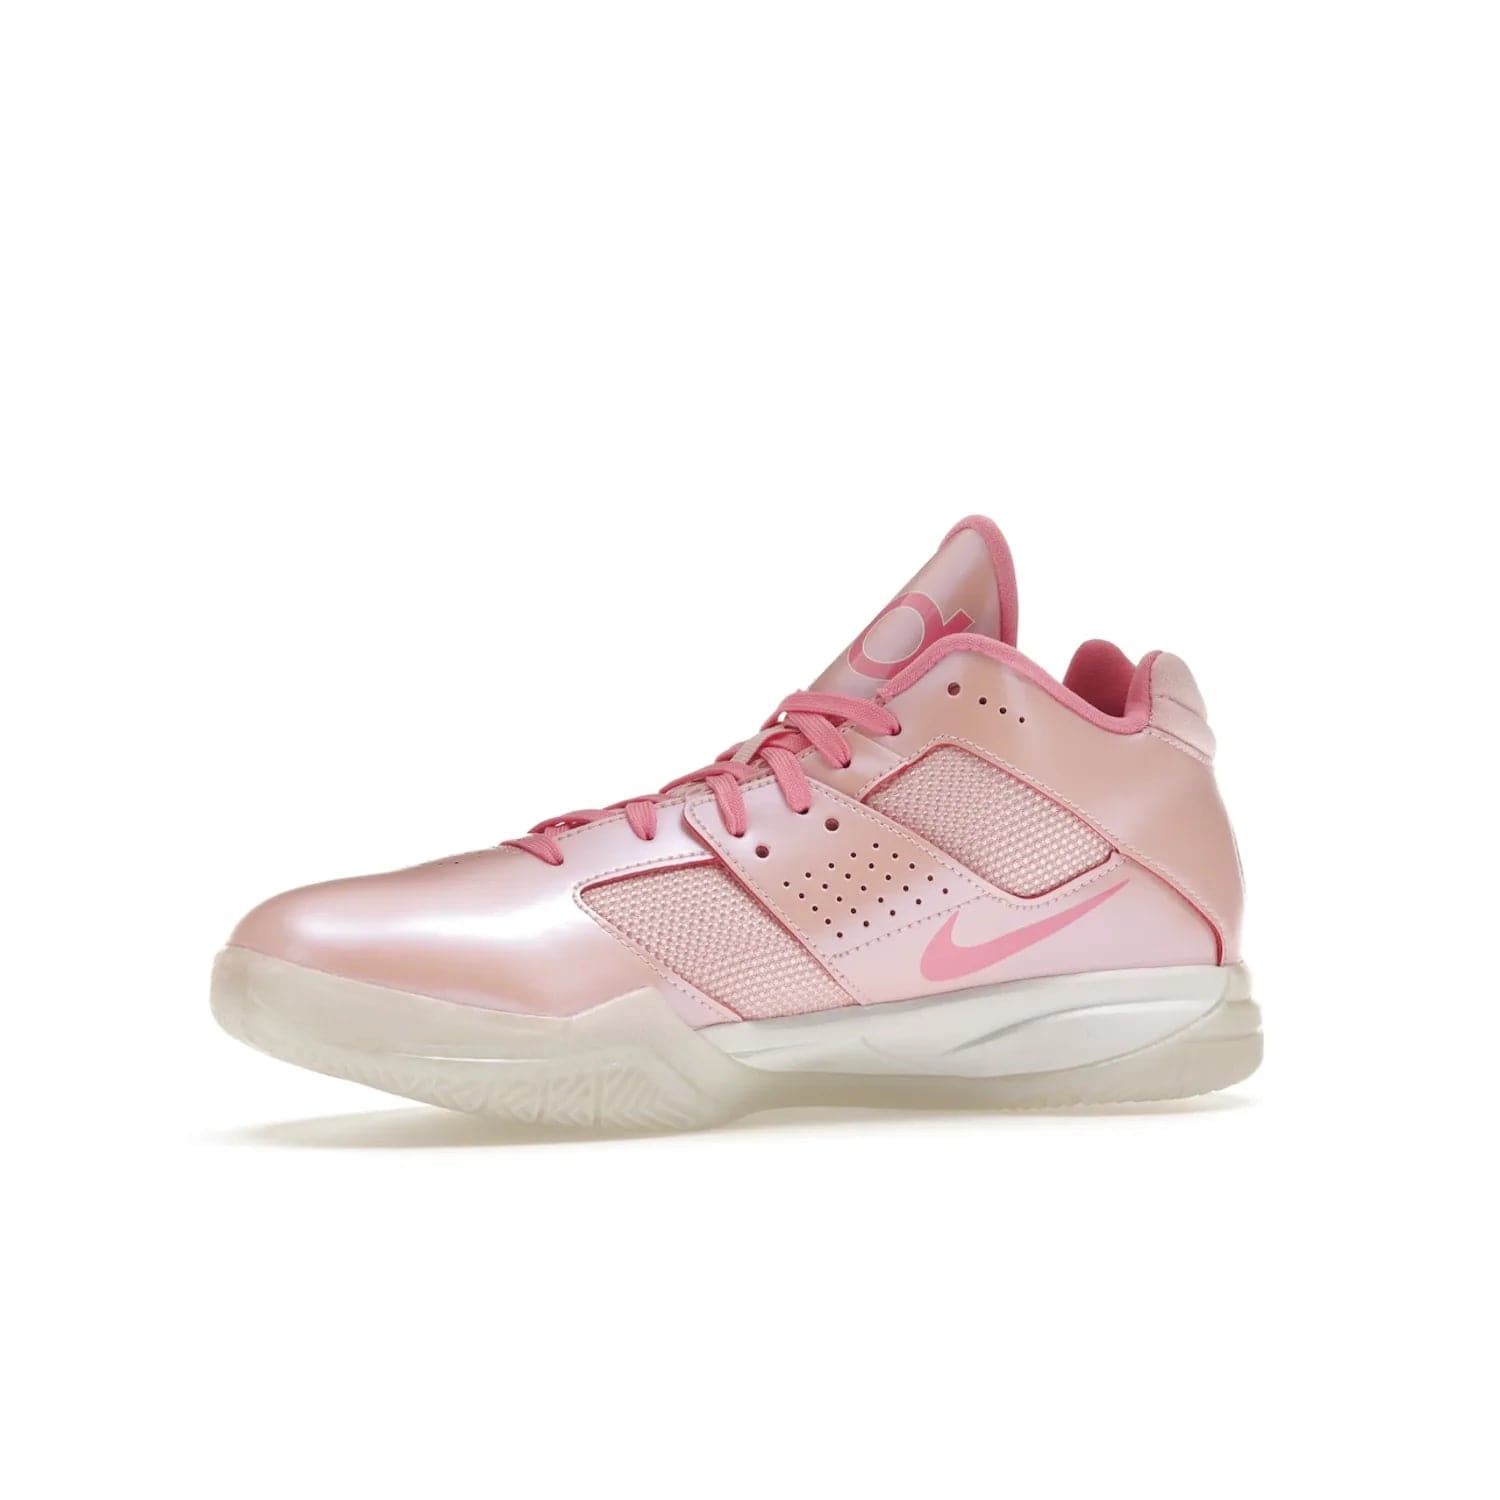 Nike KD 3 Aunt Pearl - Image 17 - Only at www.BallersClubKickz.com - Introducing the Nike KD 3 Aunt Pearl. Featuring a bold Medium Soft Pink, White, & Lotus Pink colorway. Get ready to stand out this October 15th.